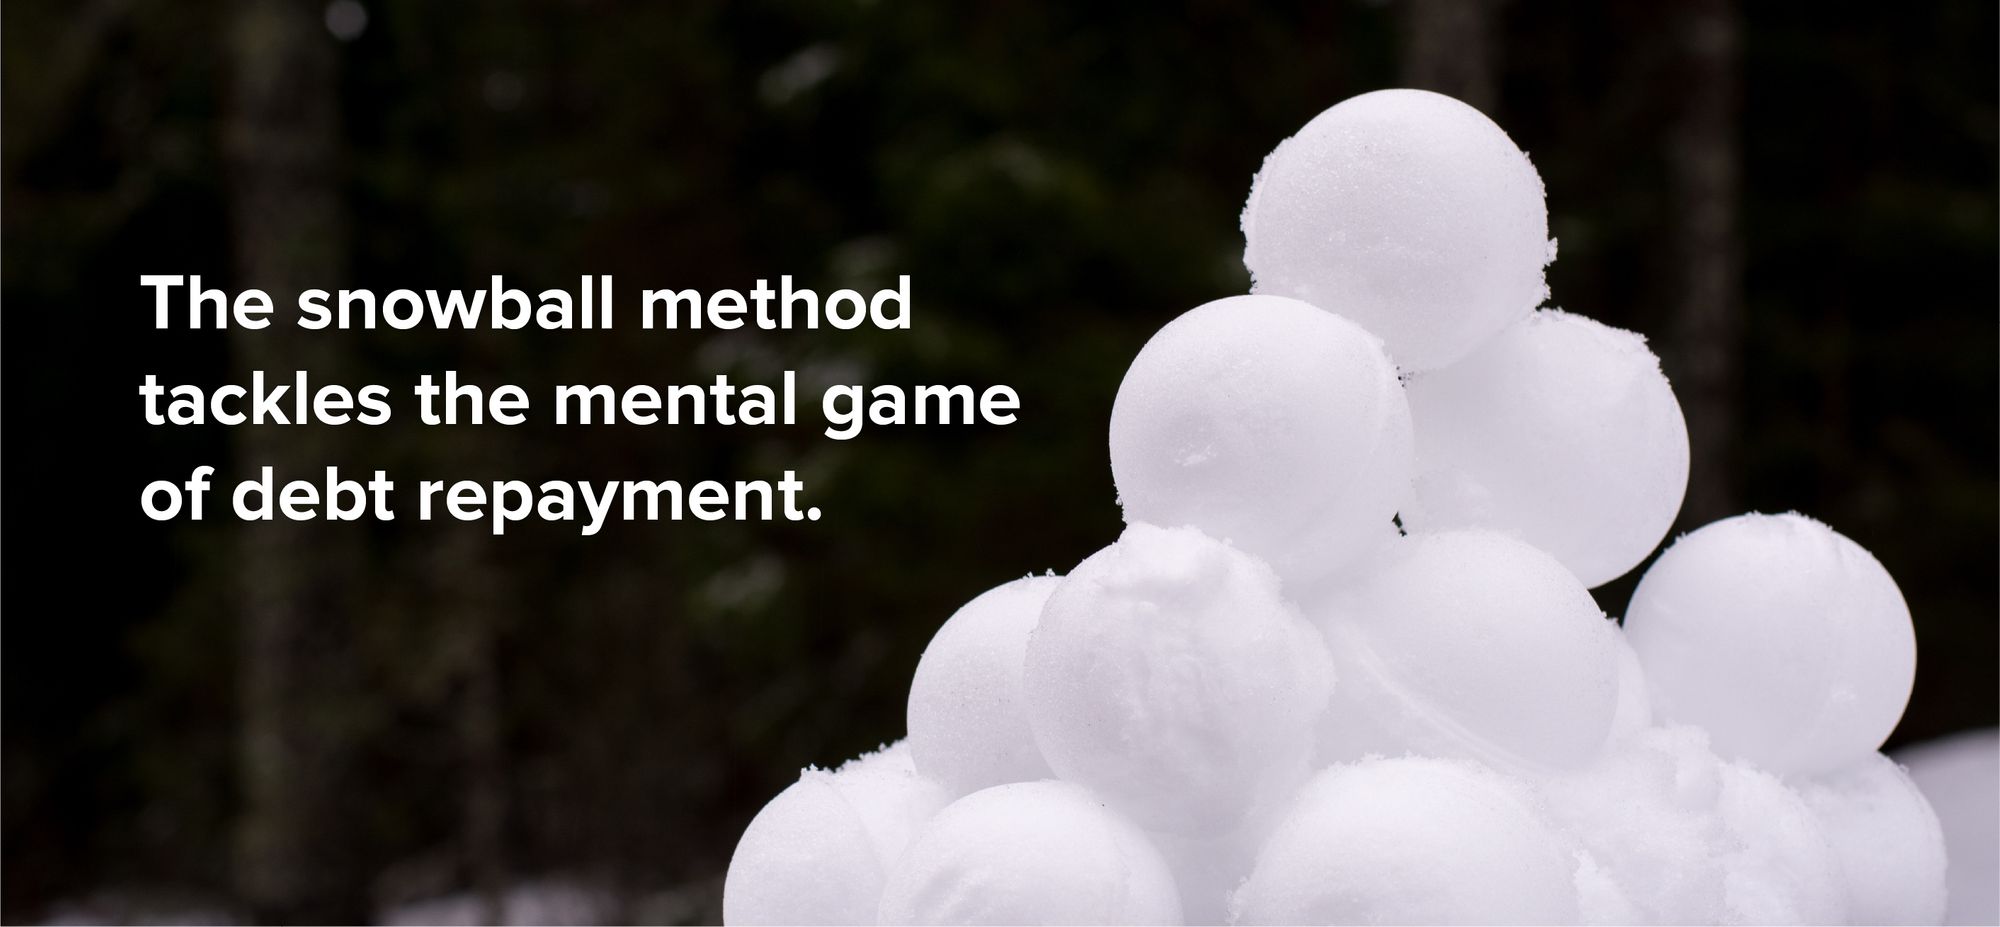 The snowball method tackles the mental game of debt repayment.